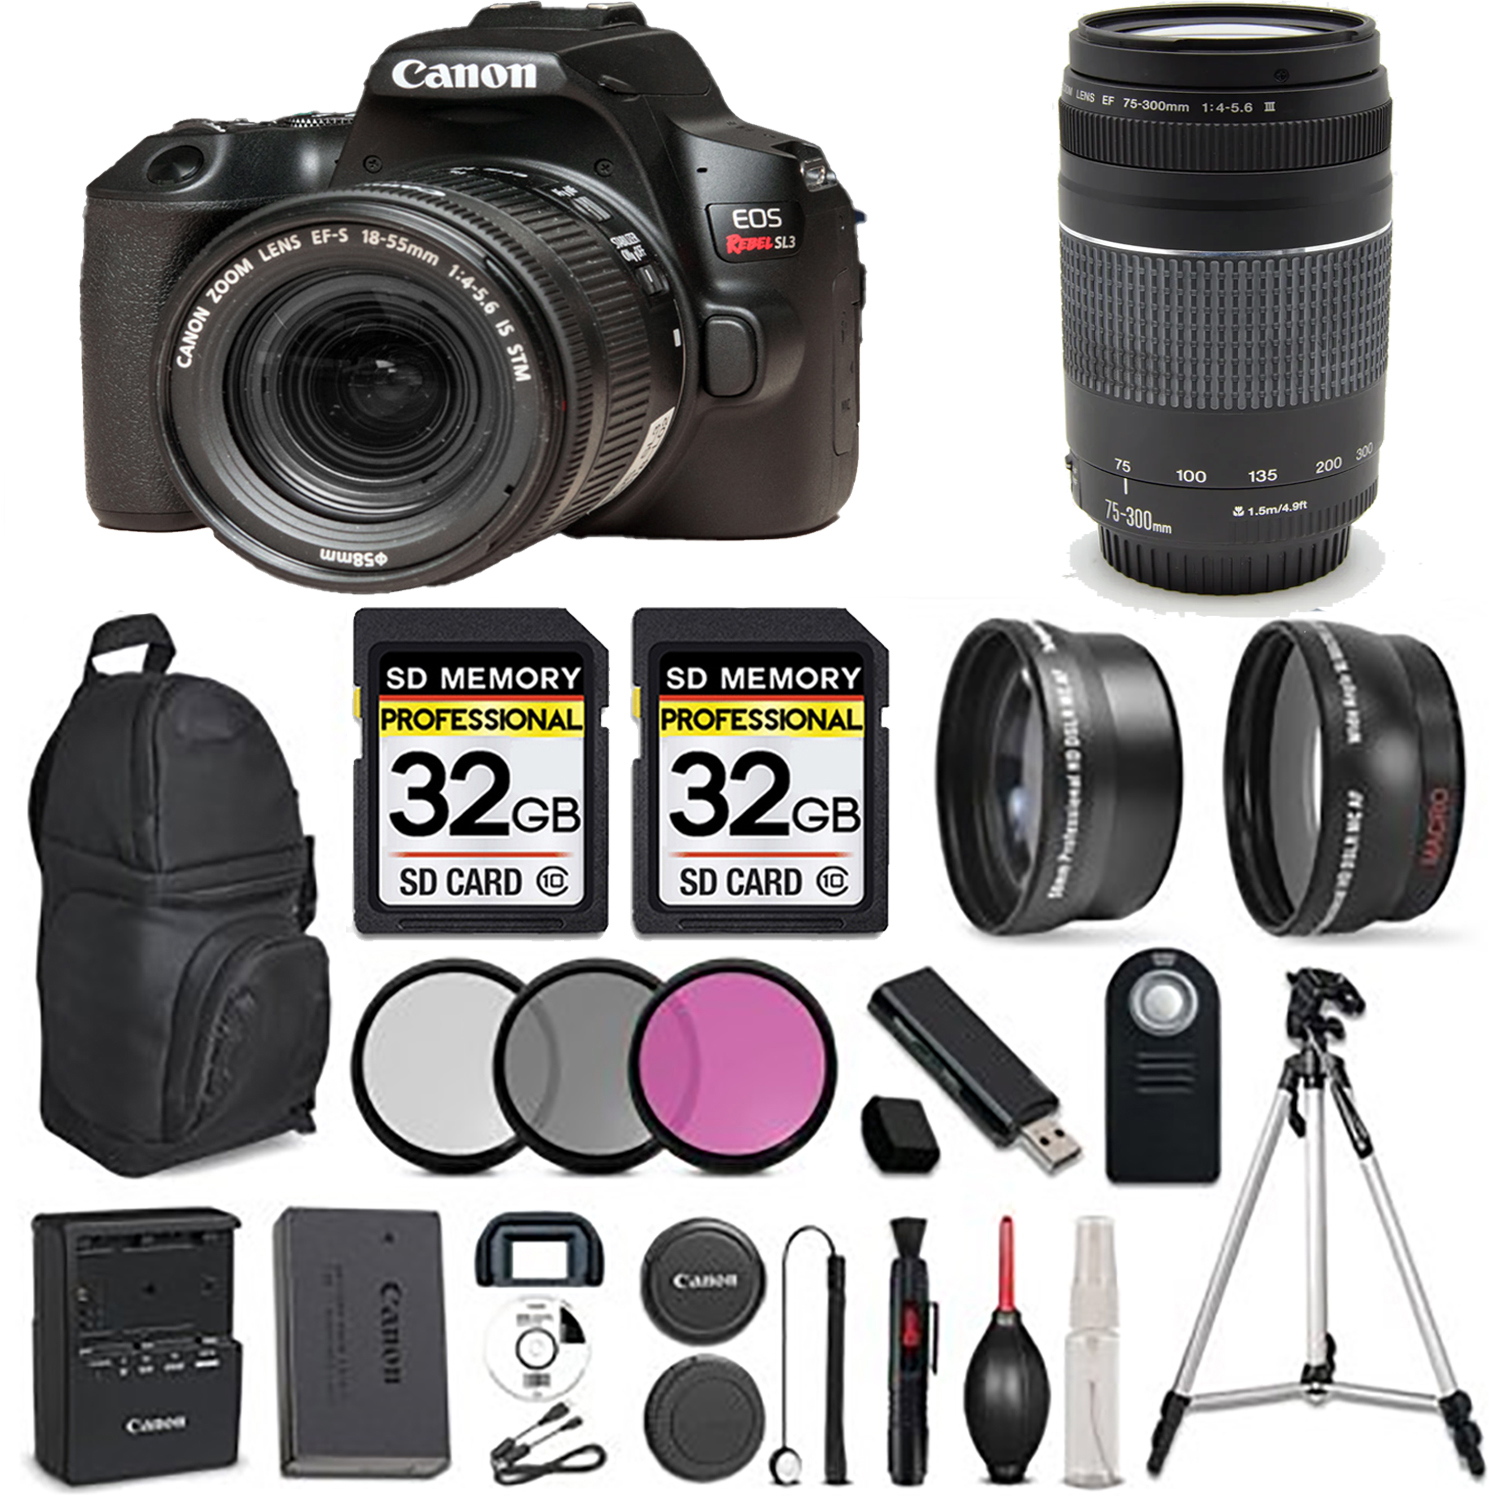 SL3 Digital Camera (Black) with 18-55mm IS STM + 75- 300mm III  - LOADED KIT *FREE SHIPPING*